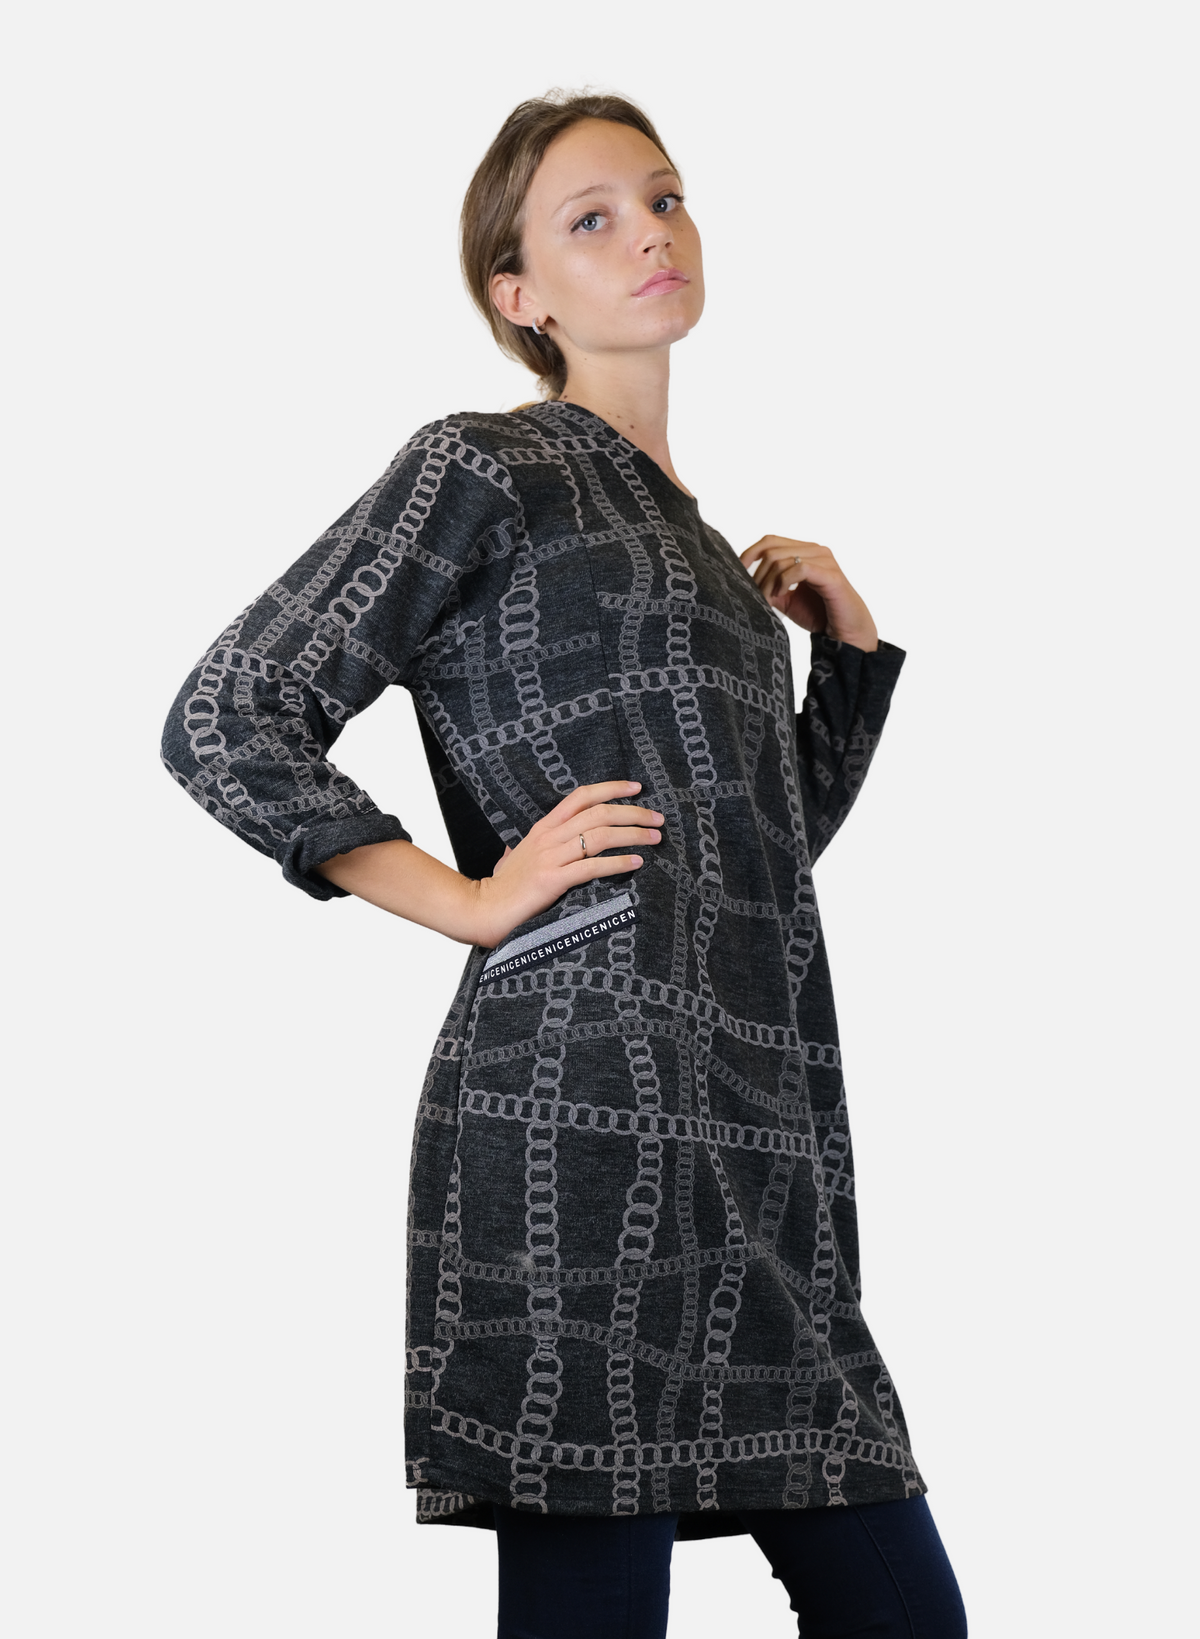 Long -sleeved hot shirt with printed caint